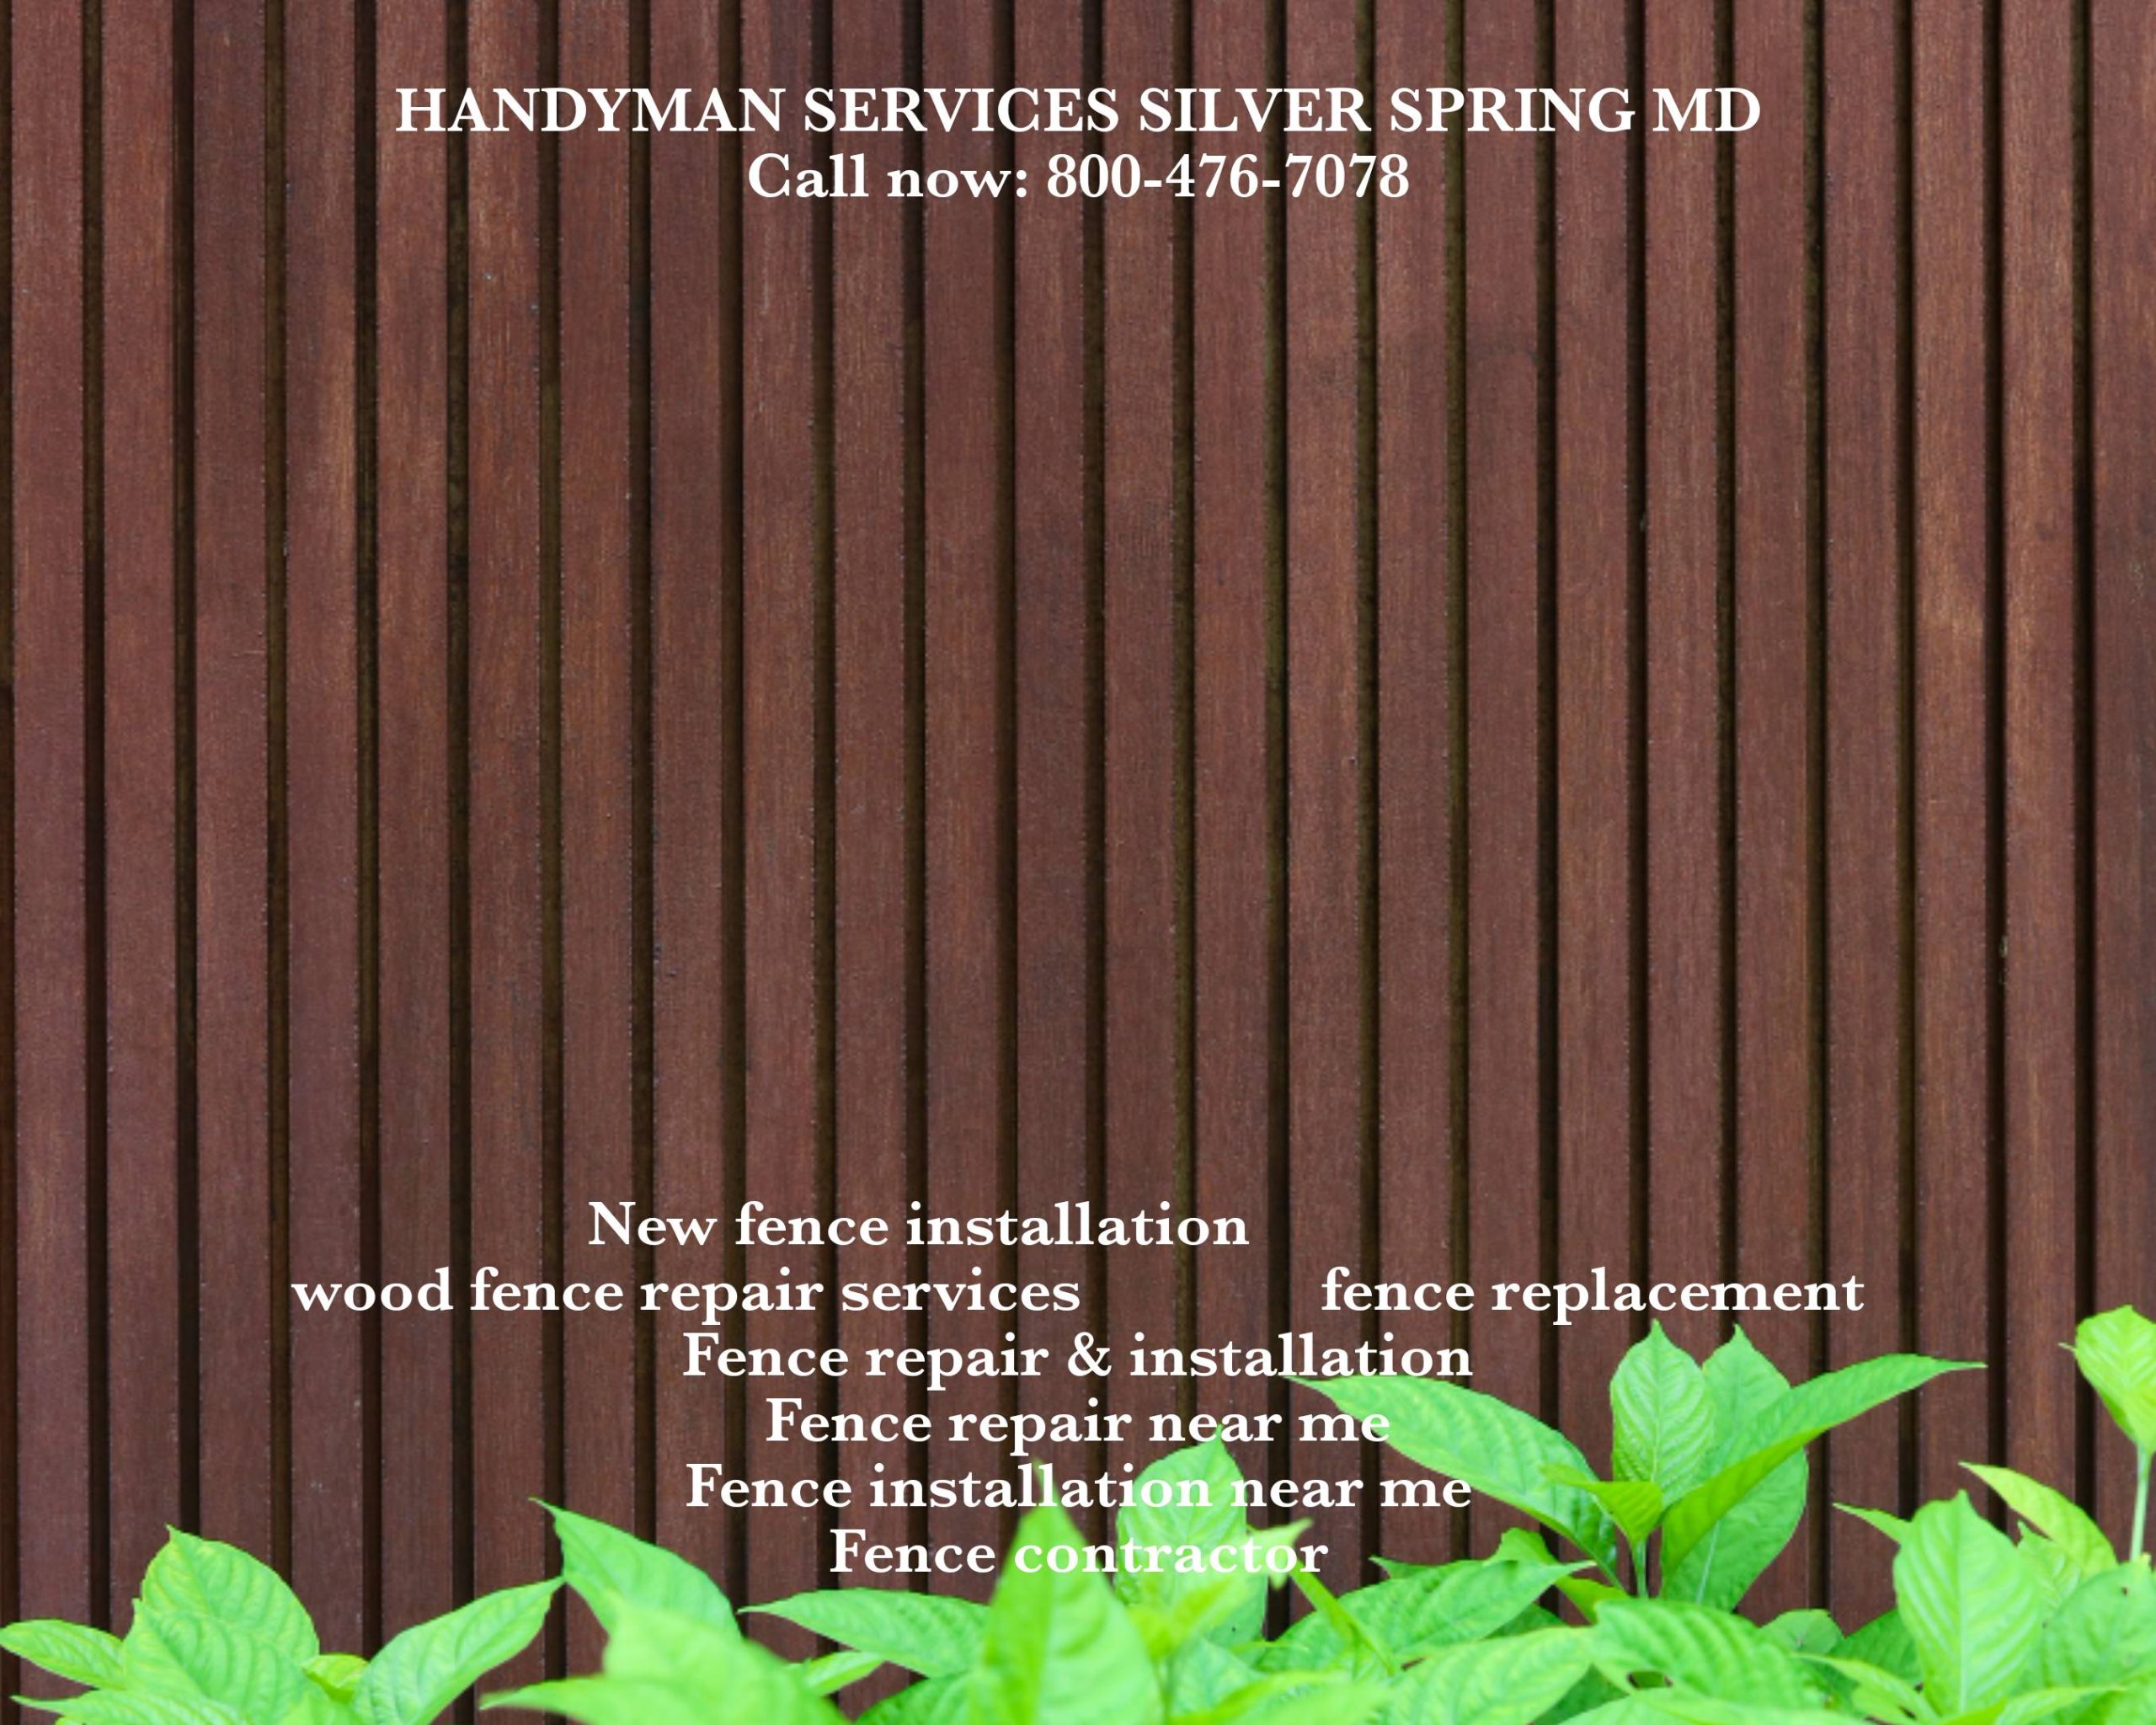 For professional fence repair & installation service.